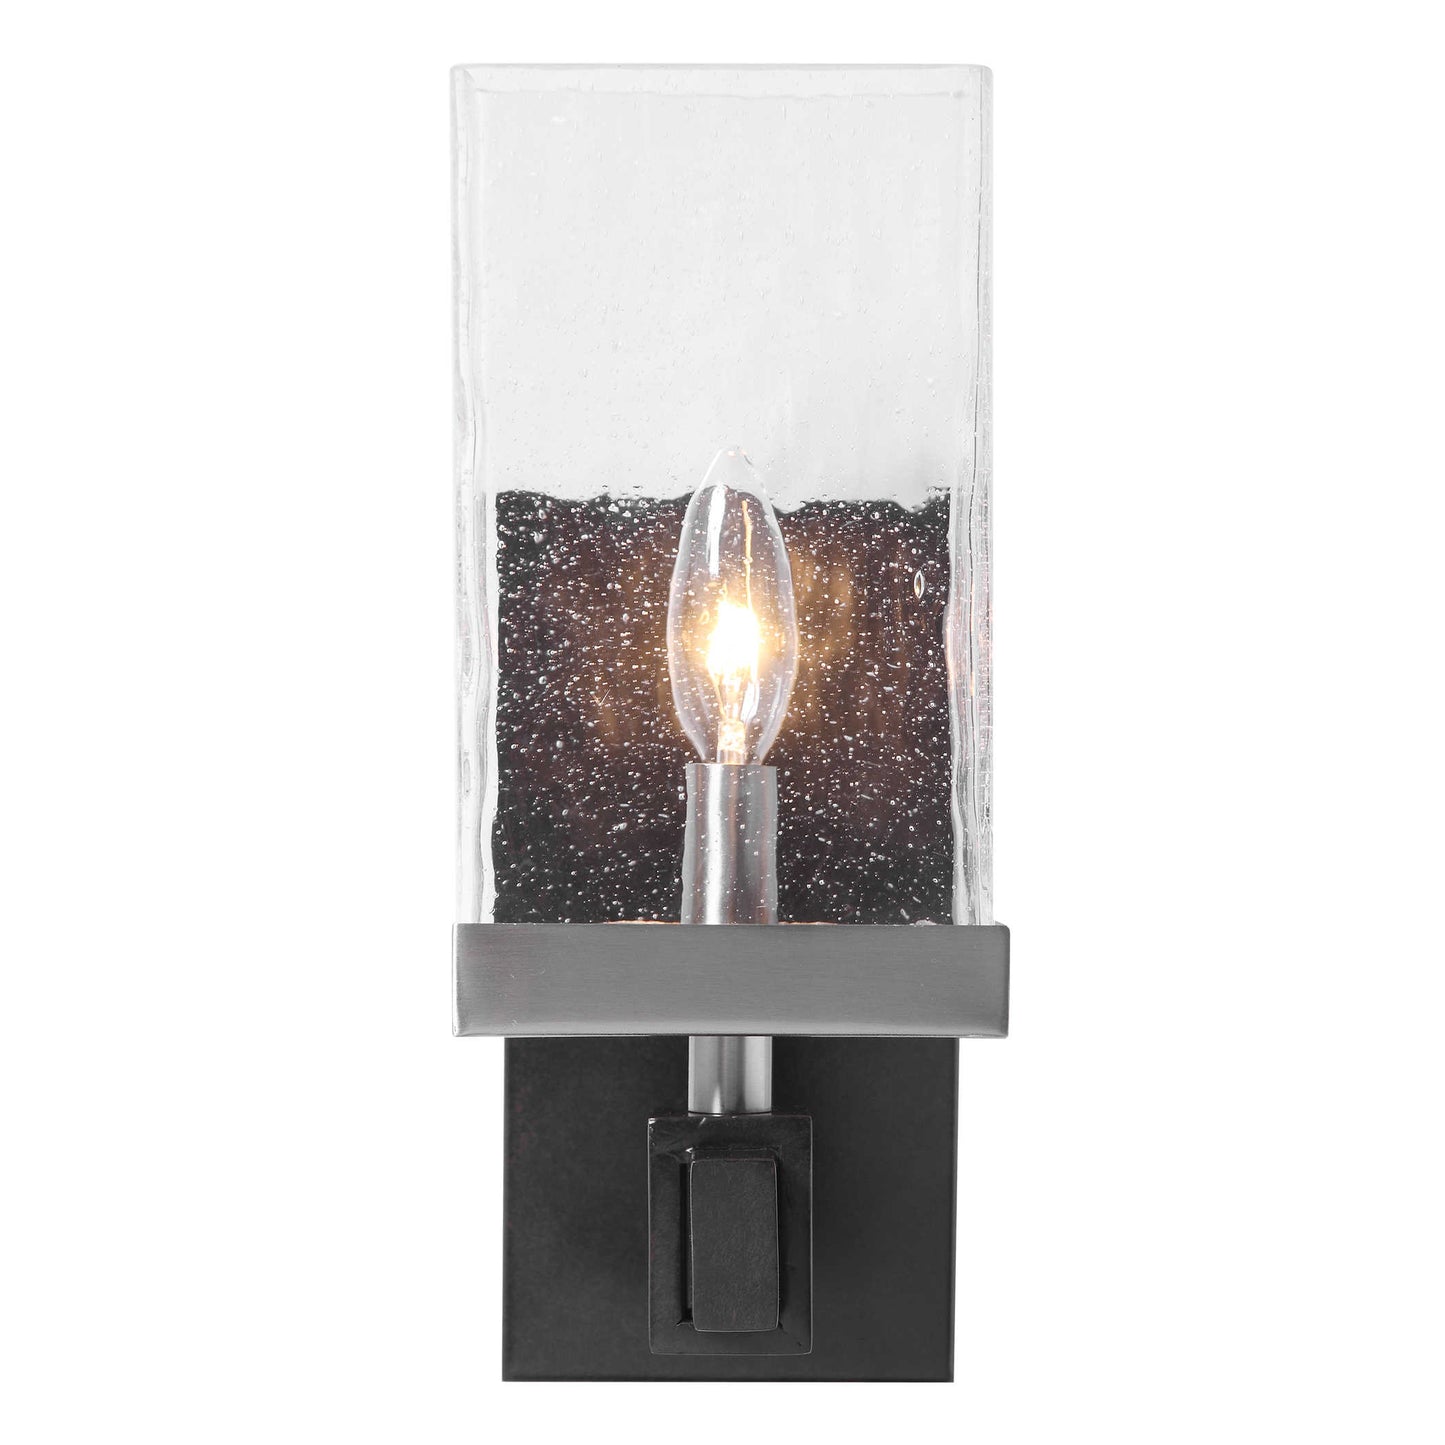 HUMBOLDT WALL SCONCE